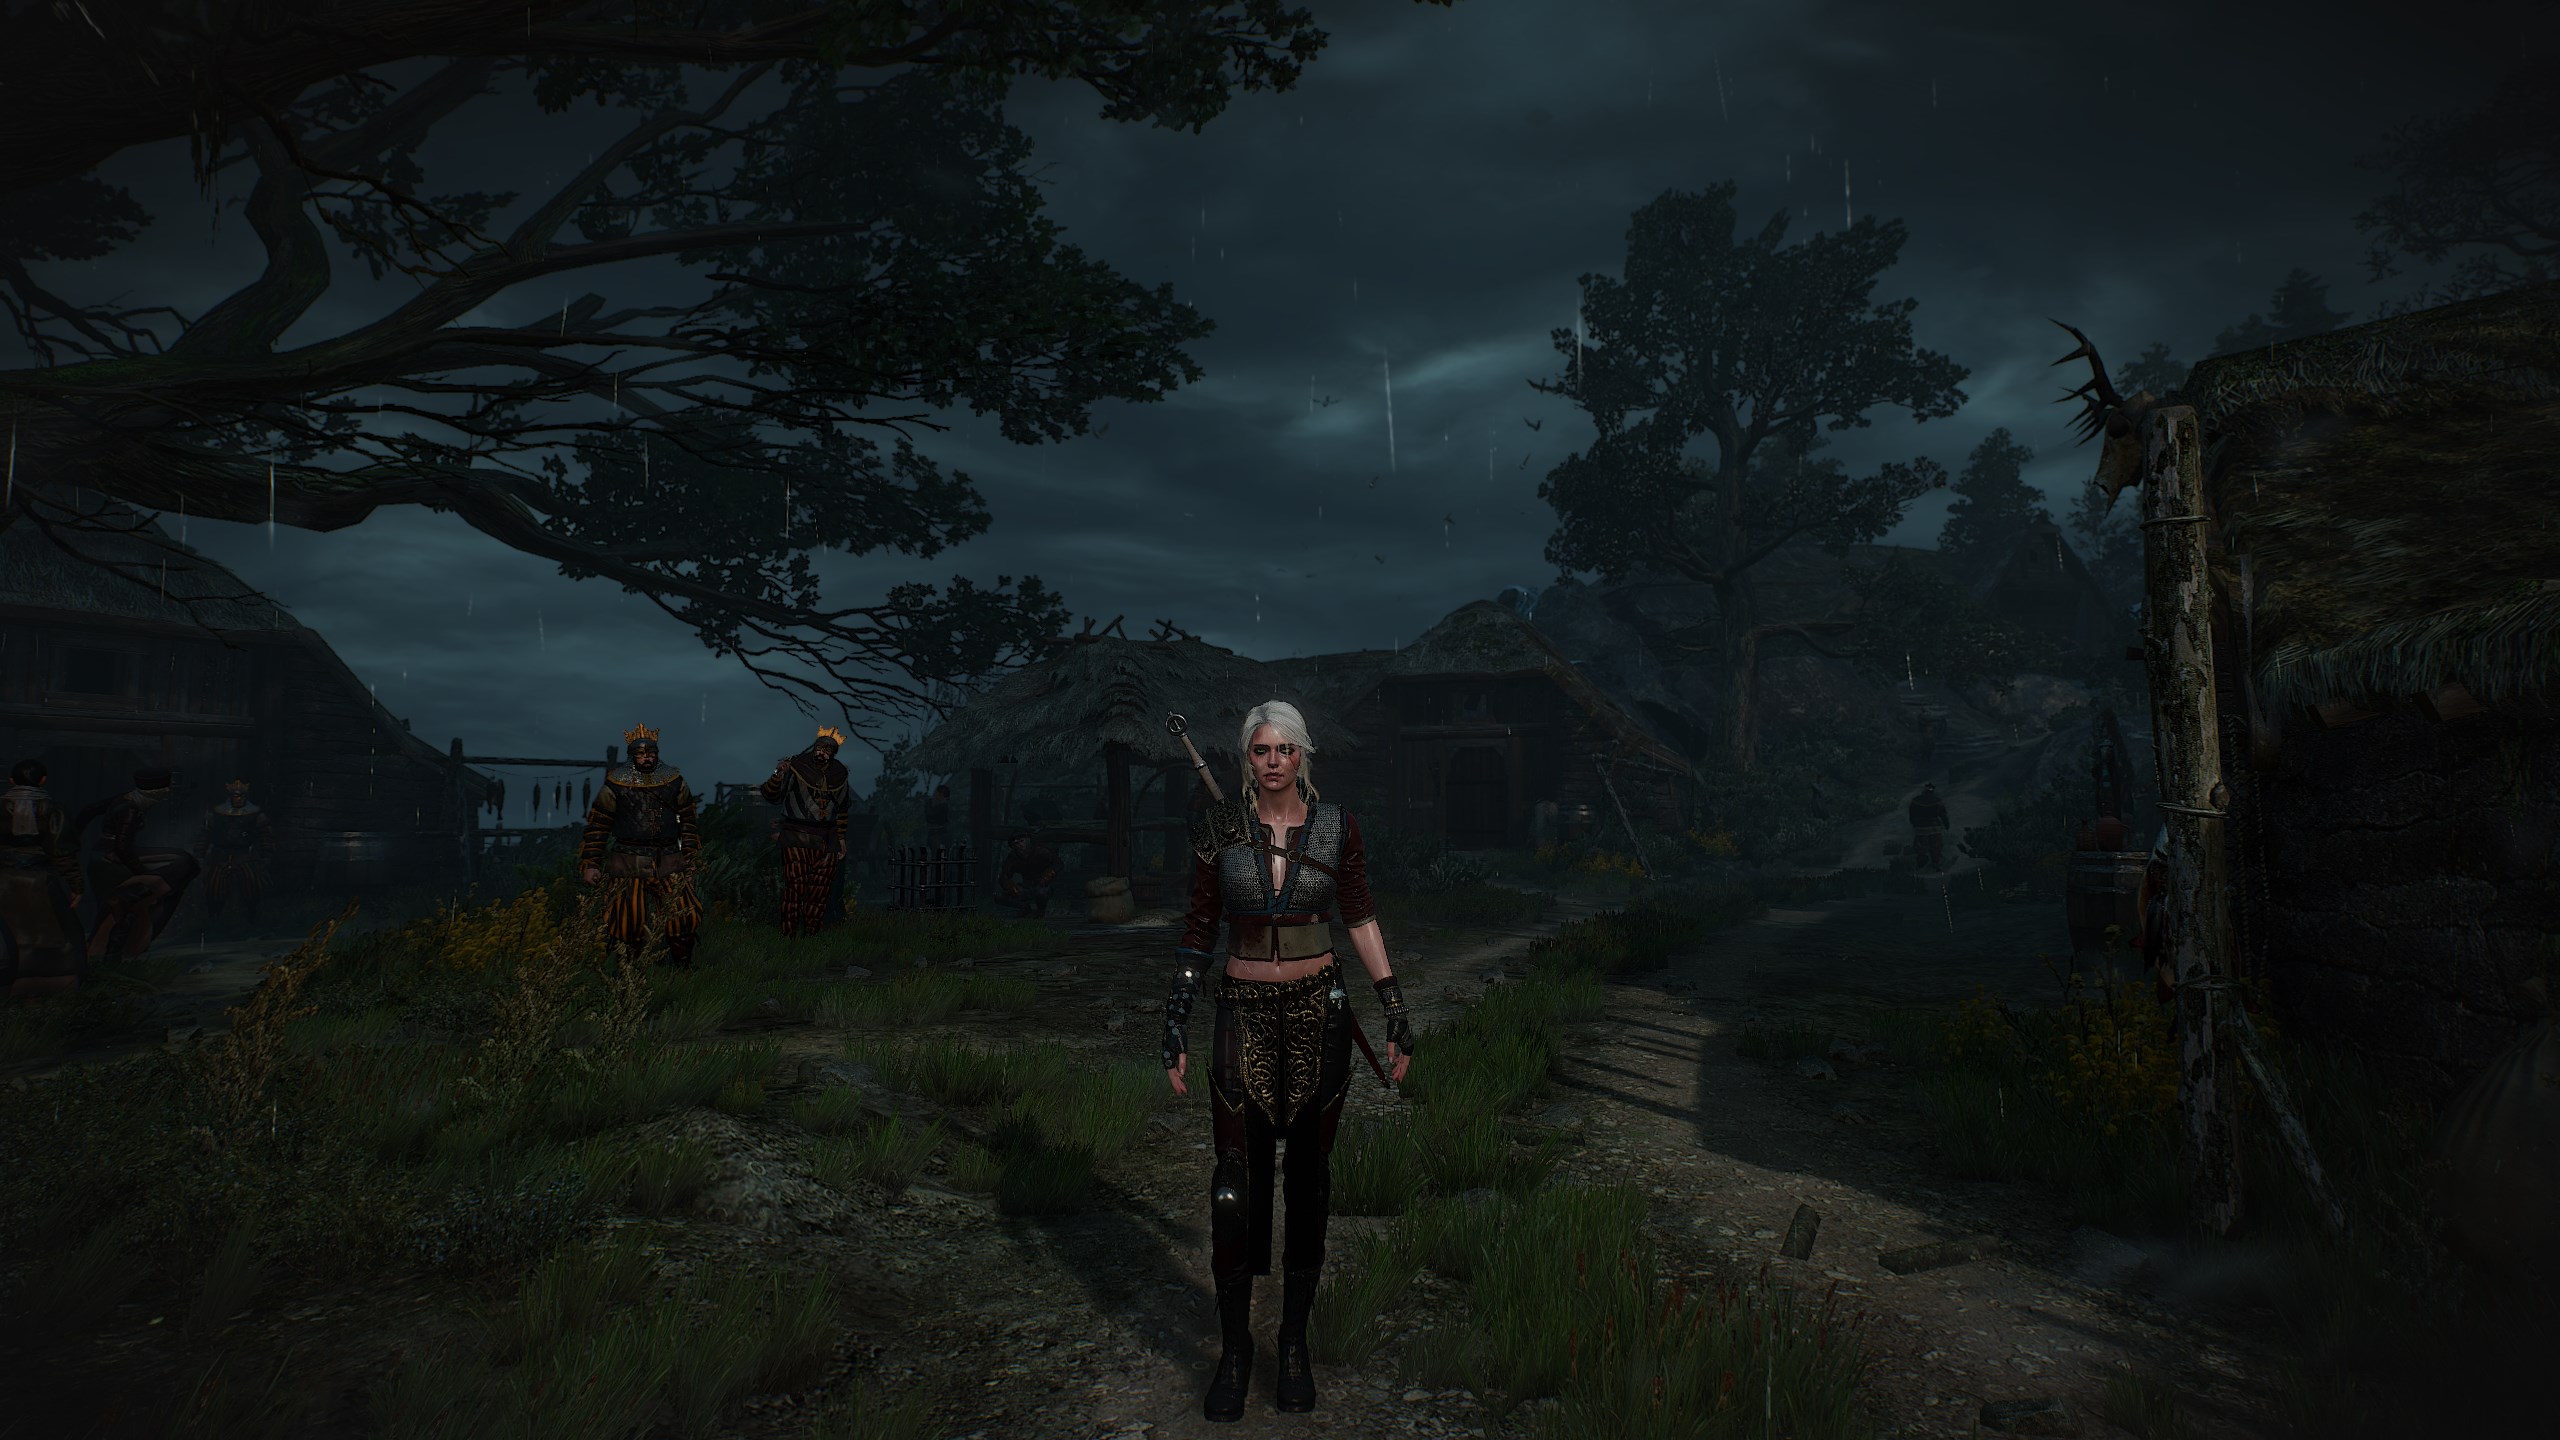 the witcher 3 1.32 cheat